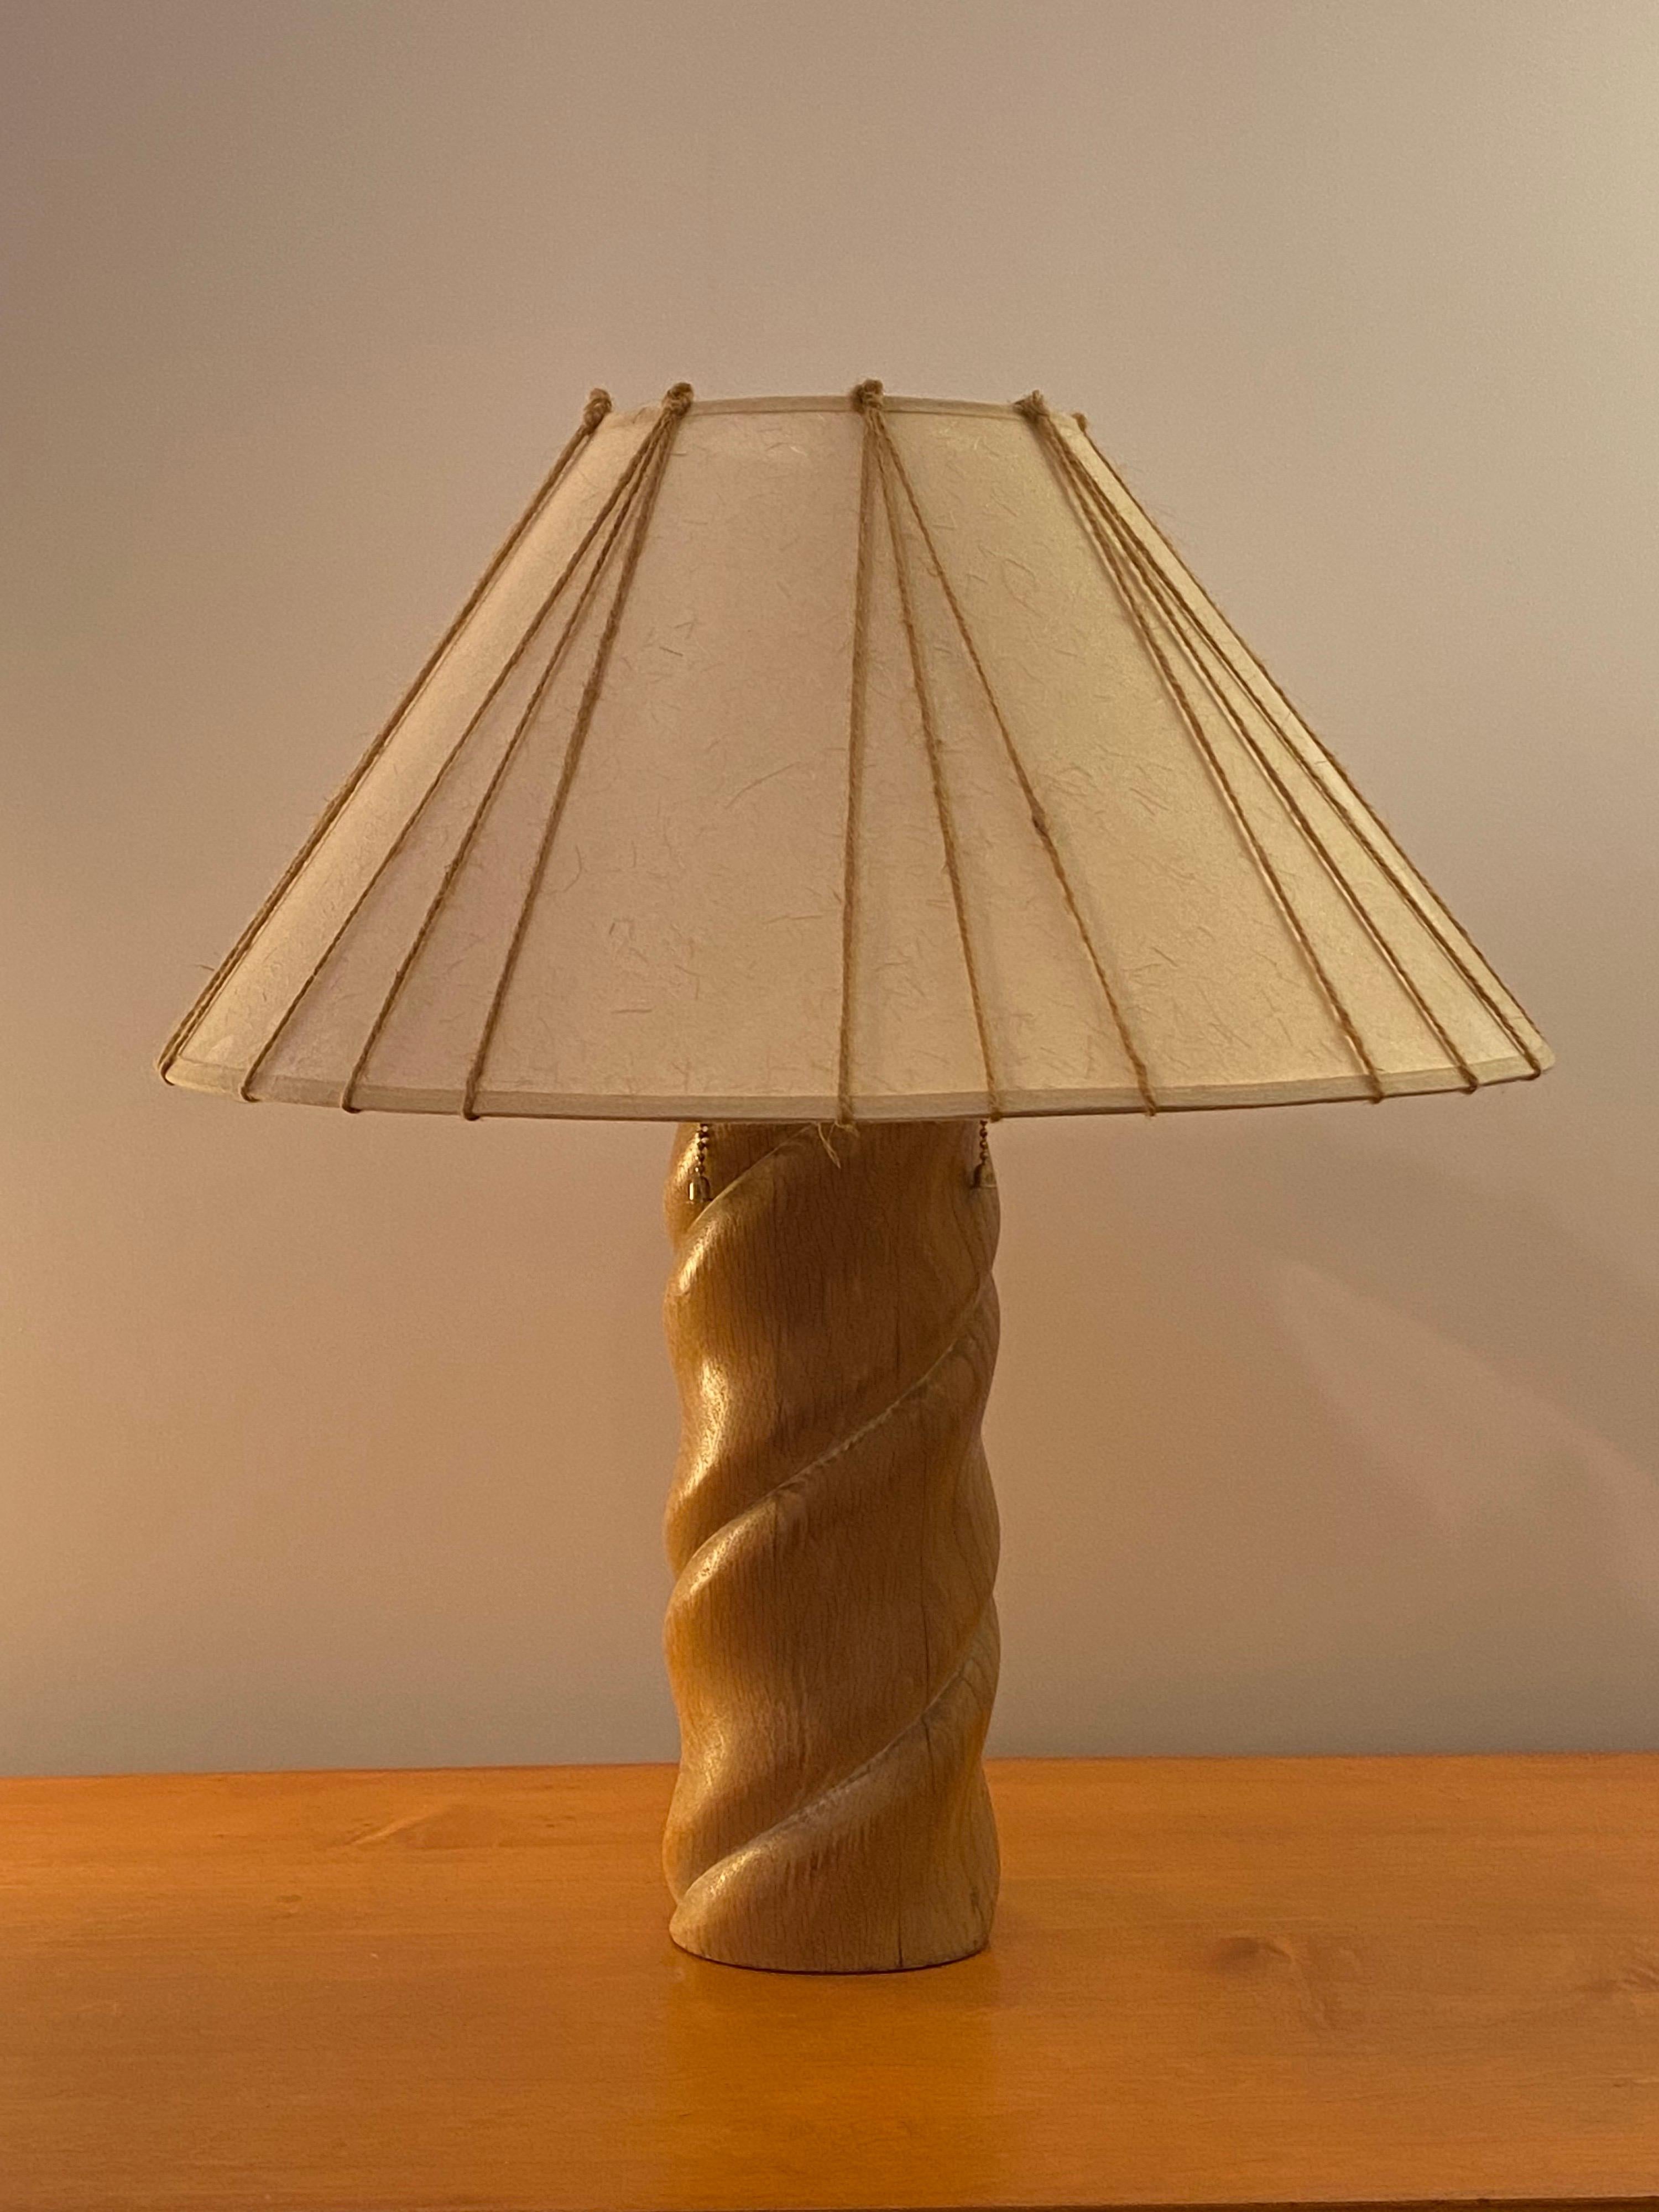 Russel Wright turned wood table lamp with a slightly pickled white finish. Early 1950's lamp produced by Fairmont Lamp Company. Original lampshade was recovered with paper very much like the original, and cord was wrapped around like originally